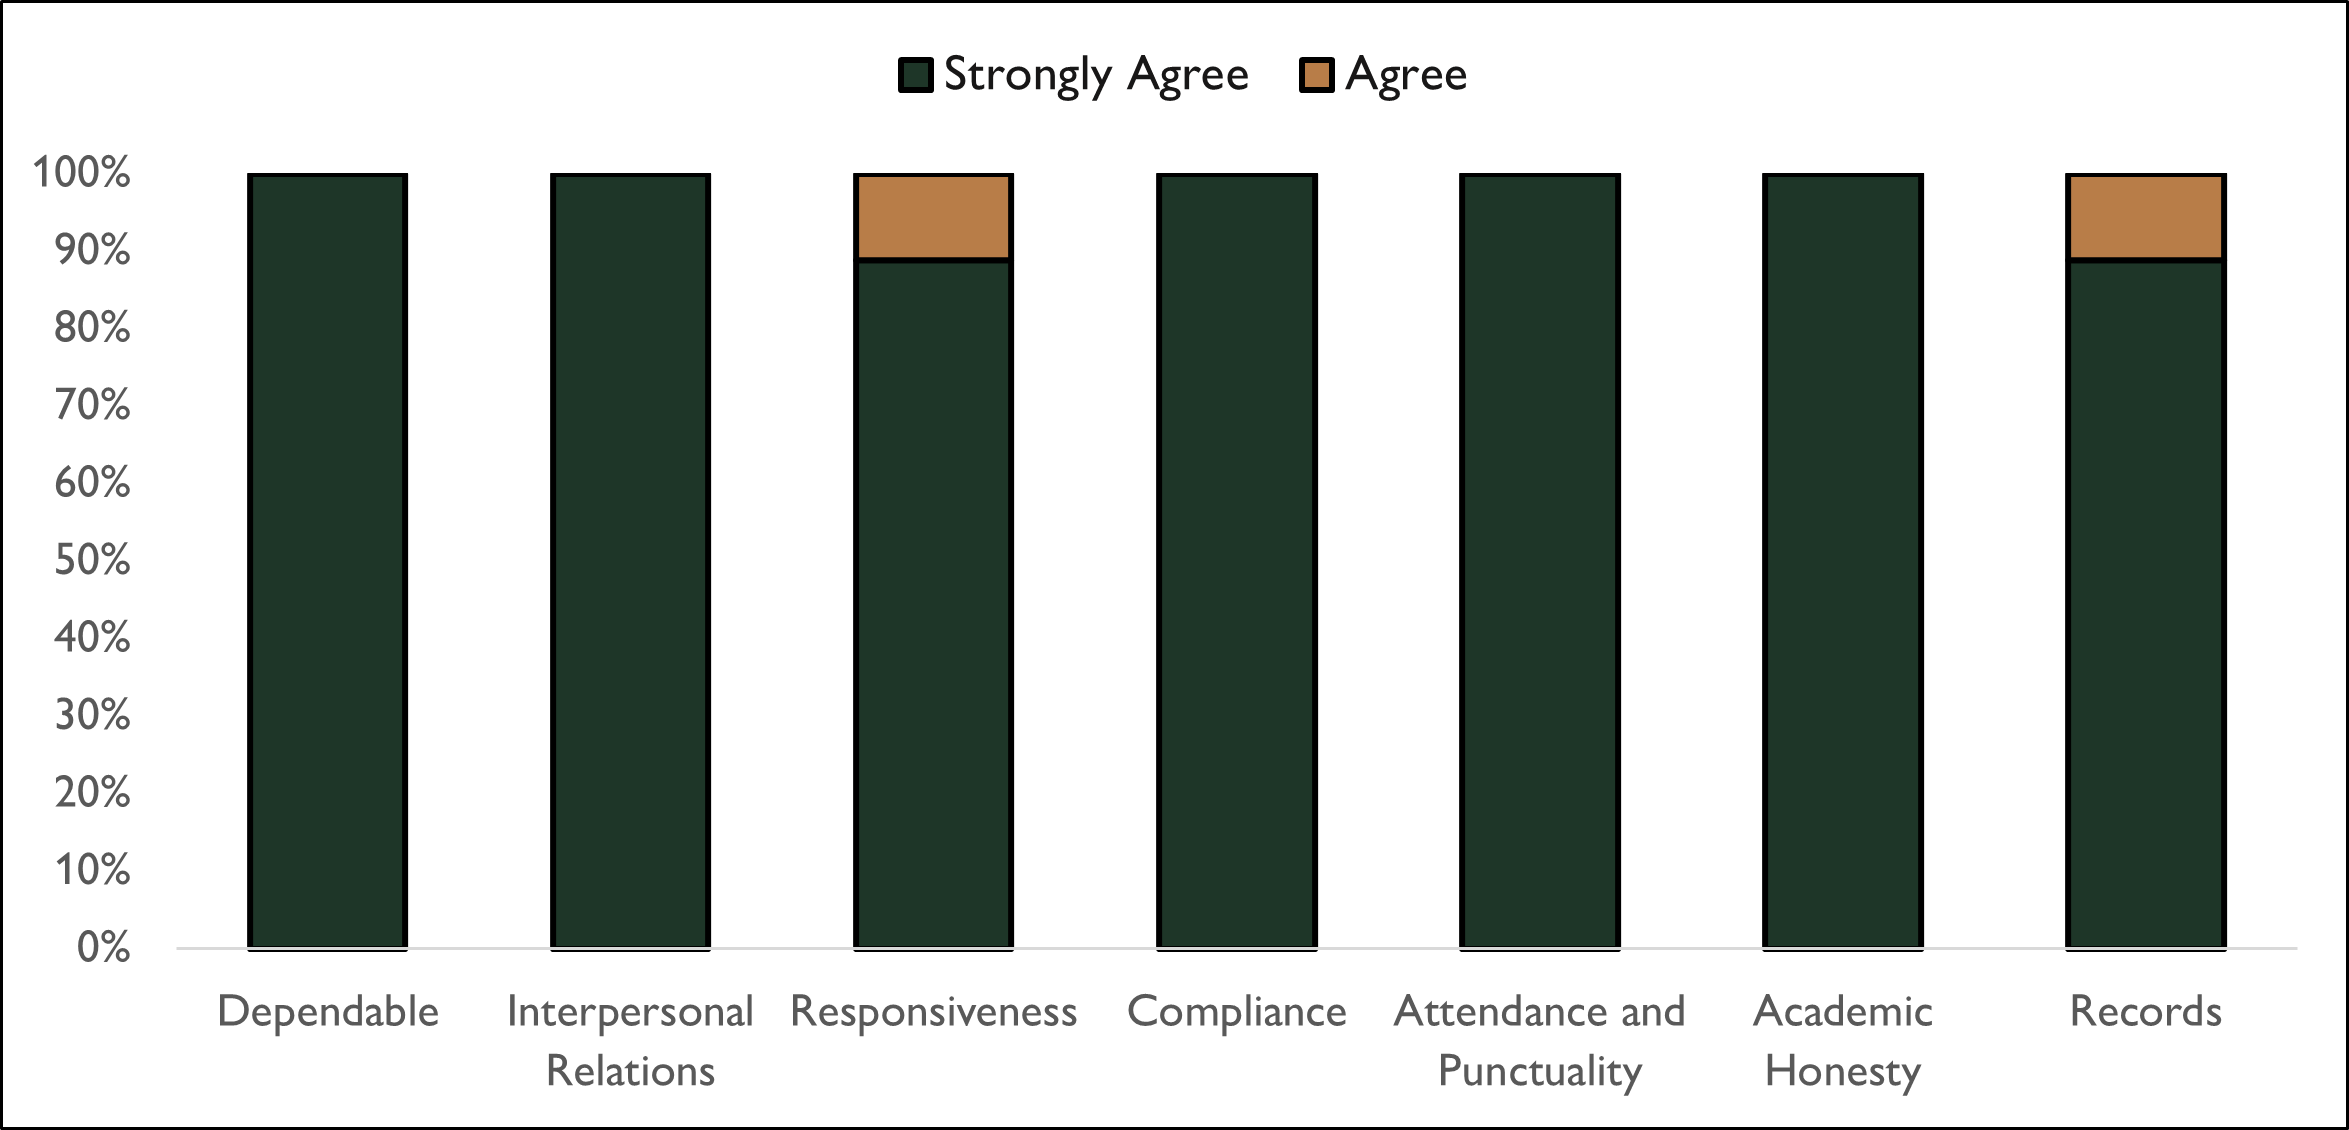 Plot of faculty evaluations showing 100% strongly agree for Dependable, Interpersonal Relations, Compliance, Attendance & Punctuality, and Academic Honesty, and
									 90% strongly agree with 10% agree for Responsiveness and Records